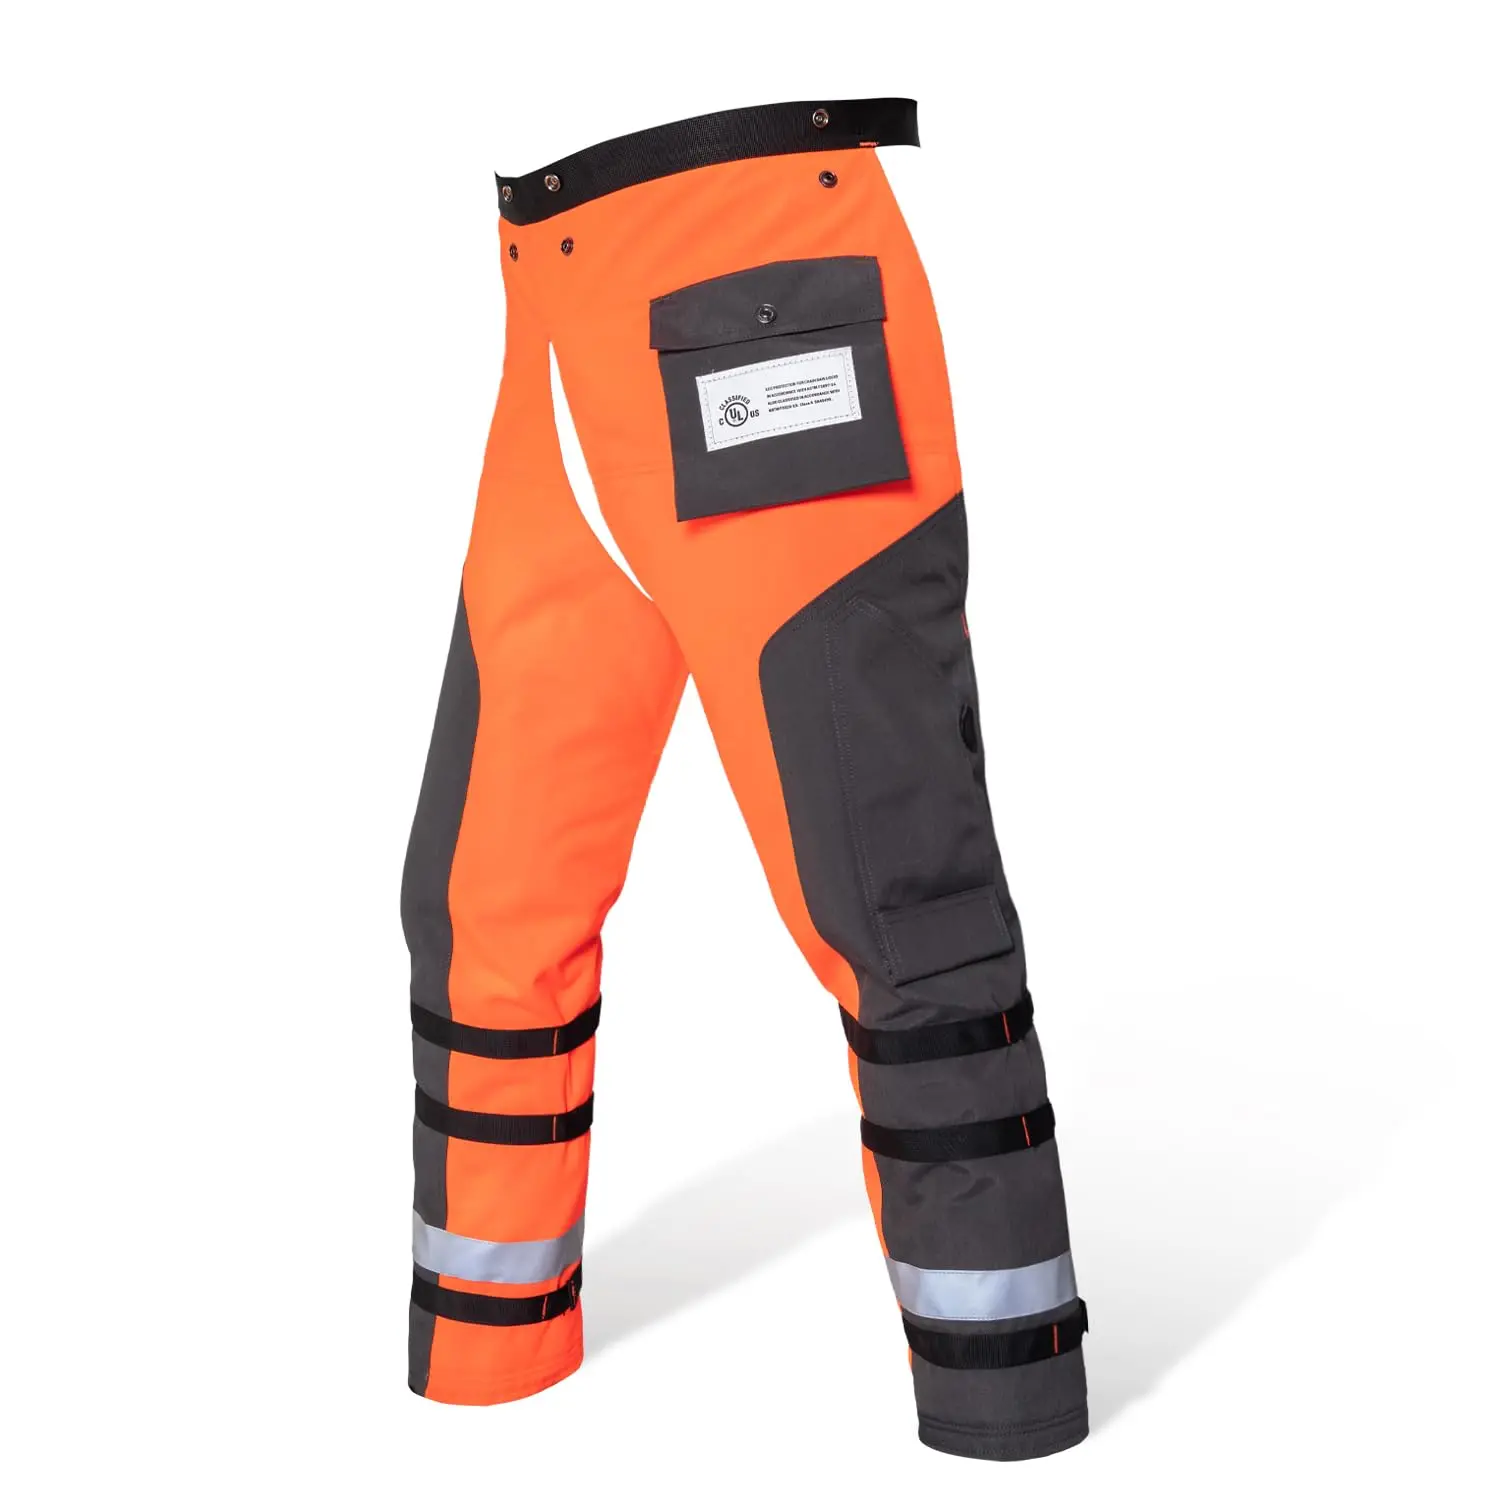 5 best chainsaw chaps: essential protection tips